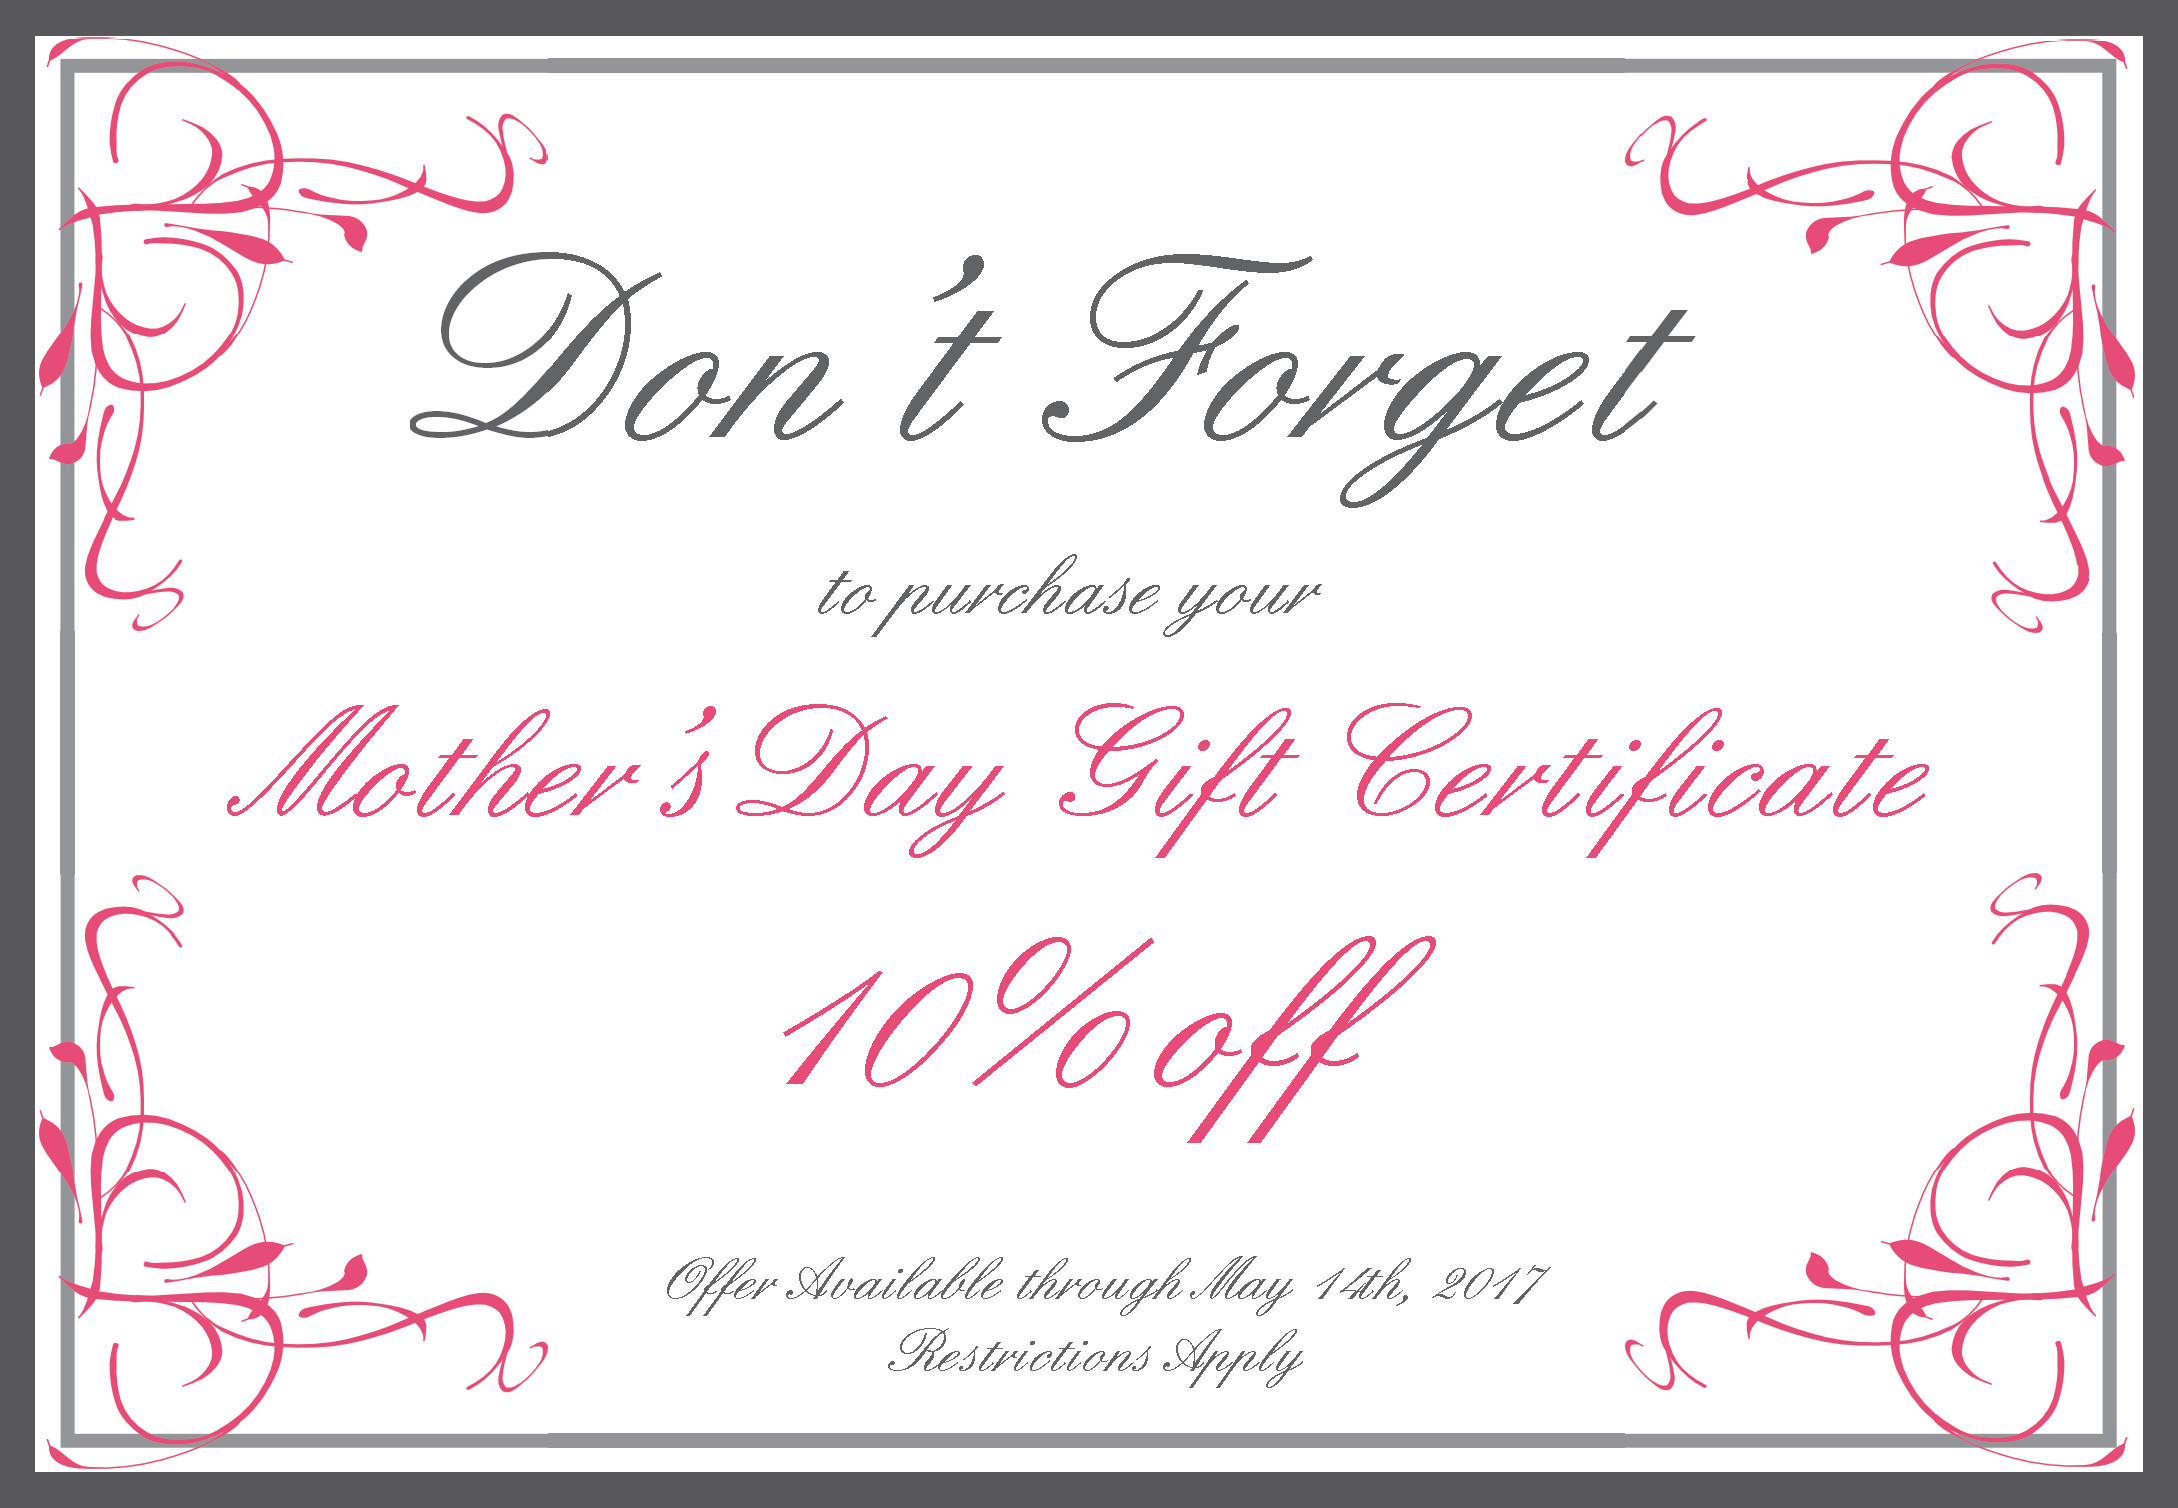 Mothers Day Gift Certificates
 News and Specials Brian Biesman MD